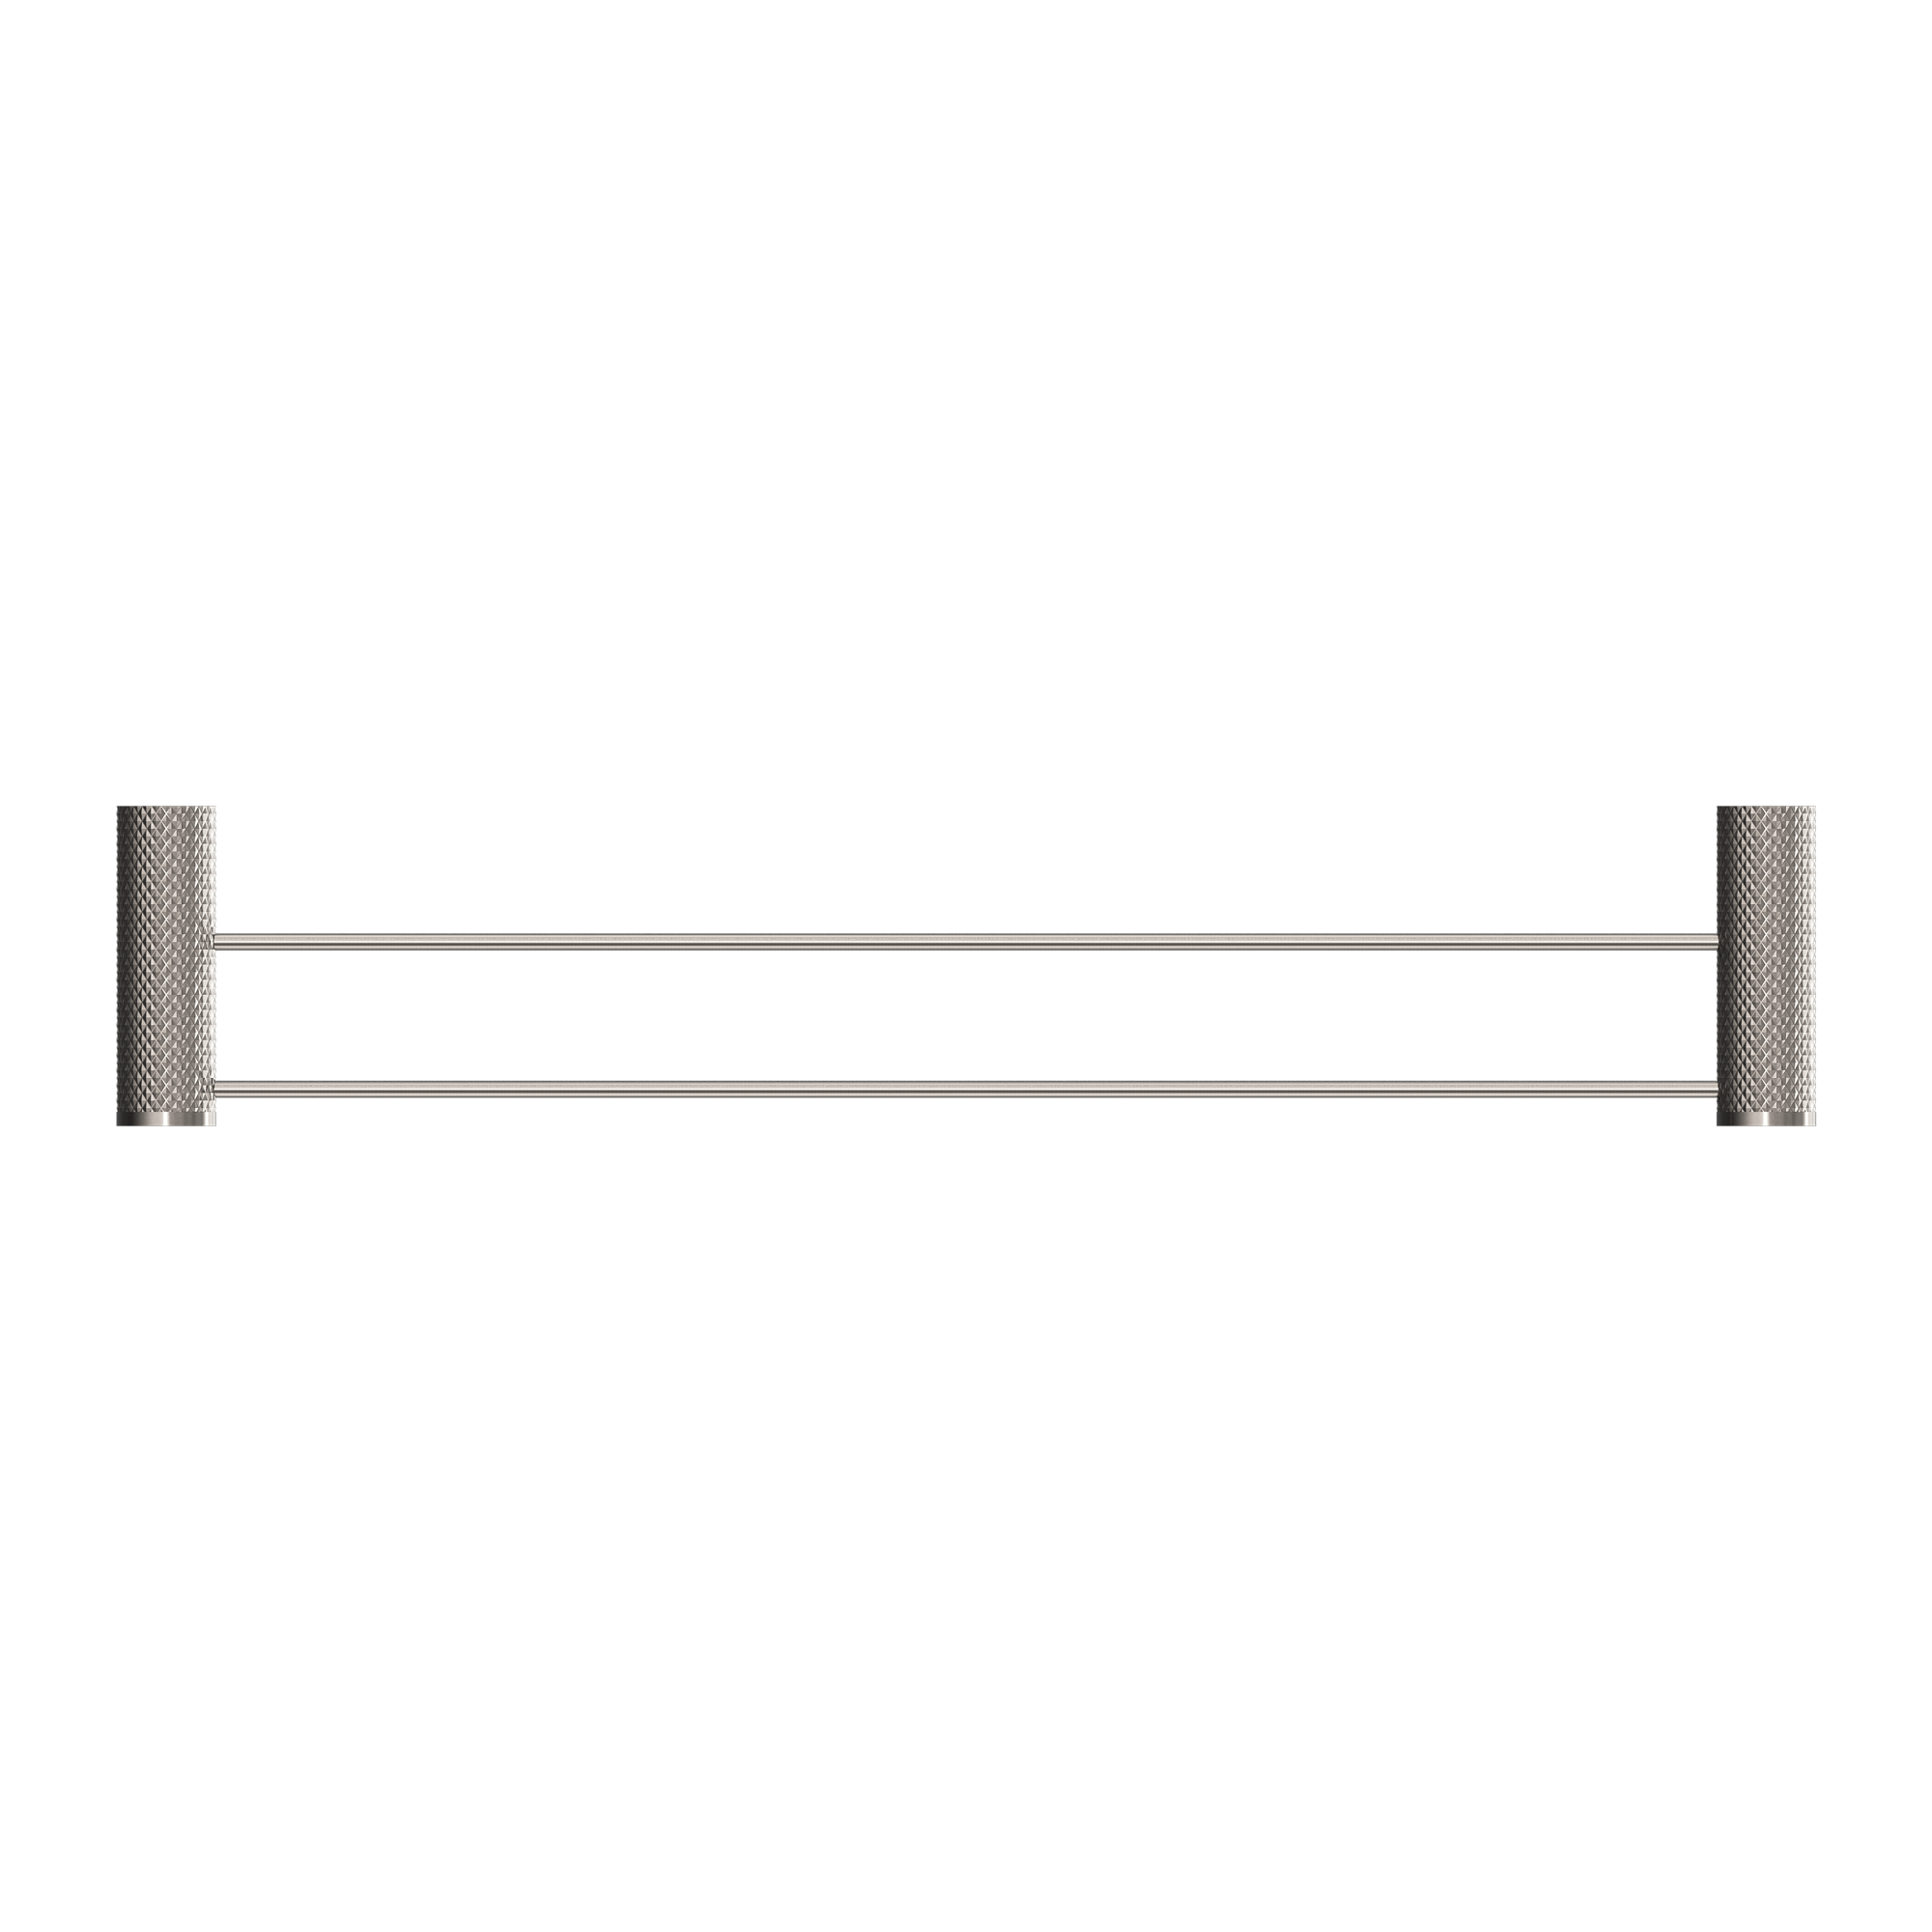 NERO OPAL NON-HEATED DOUBLE TOWEL RAIL BRUSHED NICKEL (AVAILABLE IN 600MM AND 800MM)